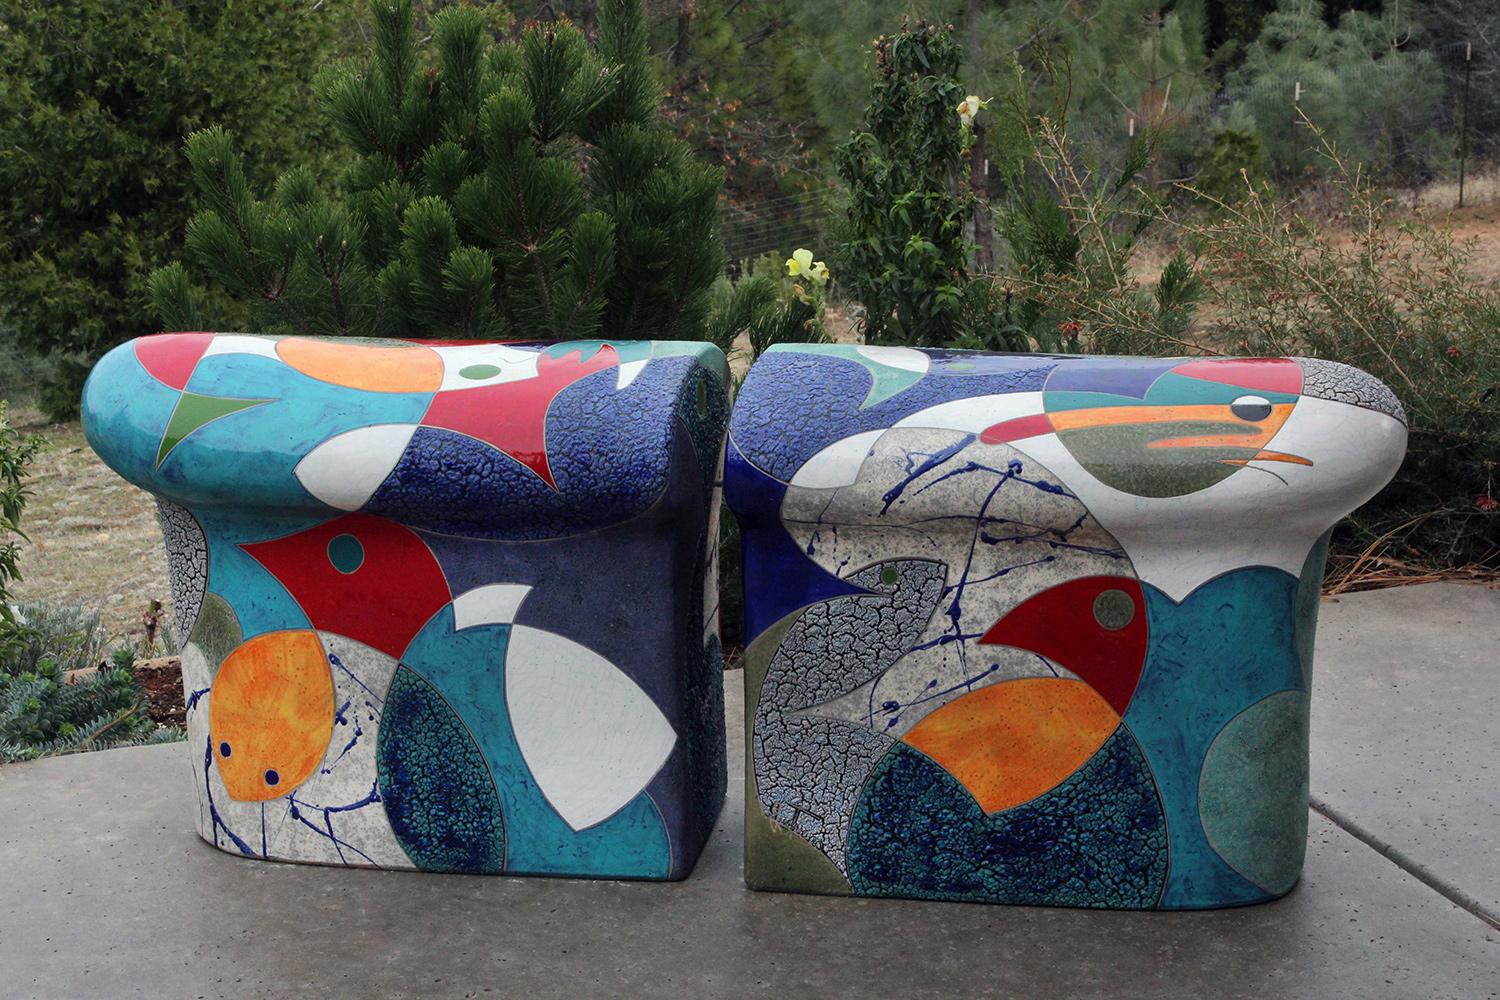 This curvy, colorful seat is brought to life with artist Michael Gustavson's masterfully detailed and gorgeously textured glazes in a variety of colors. The two hand-built ceramic elements can be spaced apart for individual seats, or together to